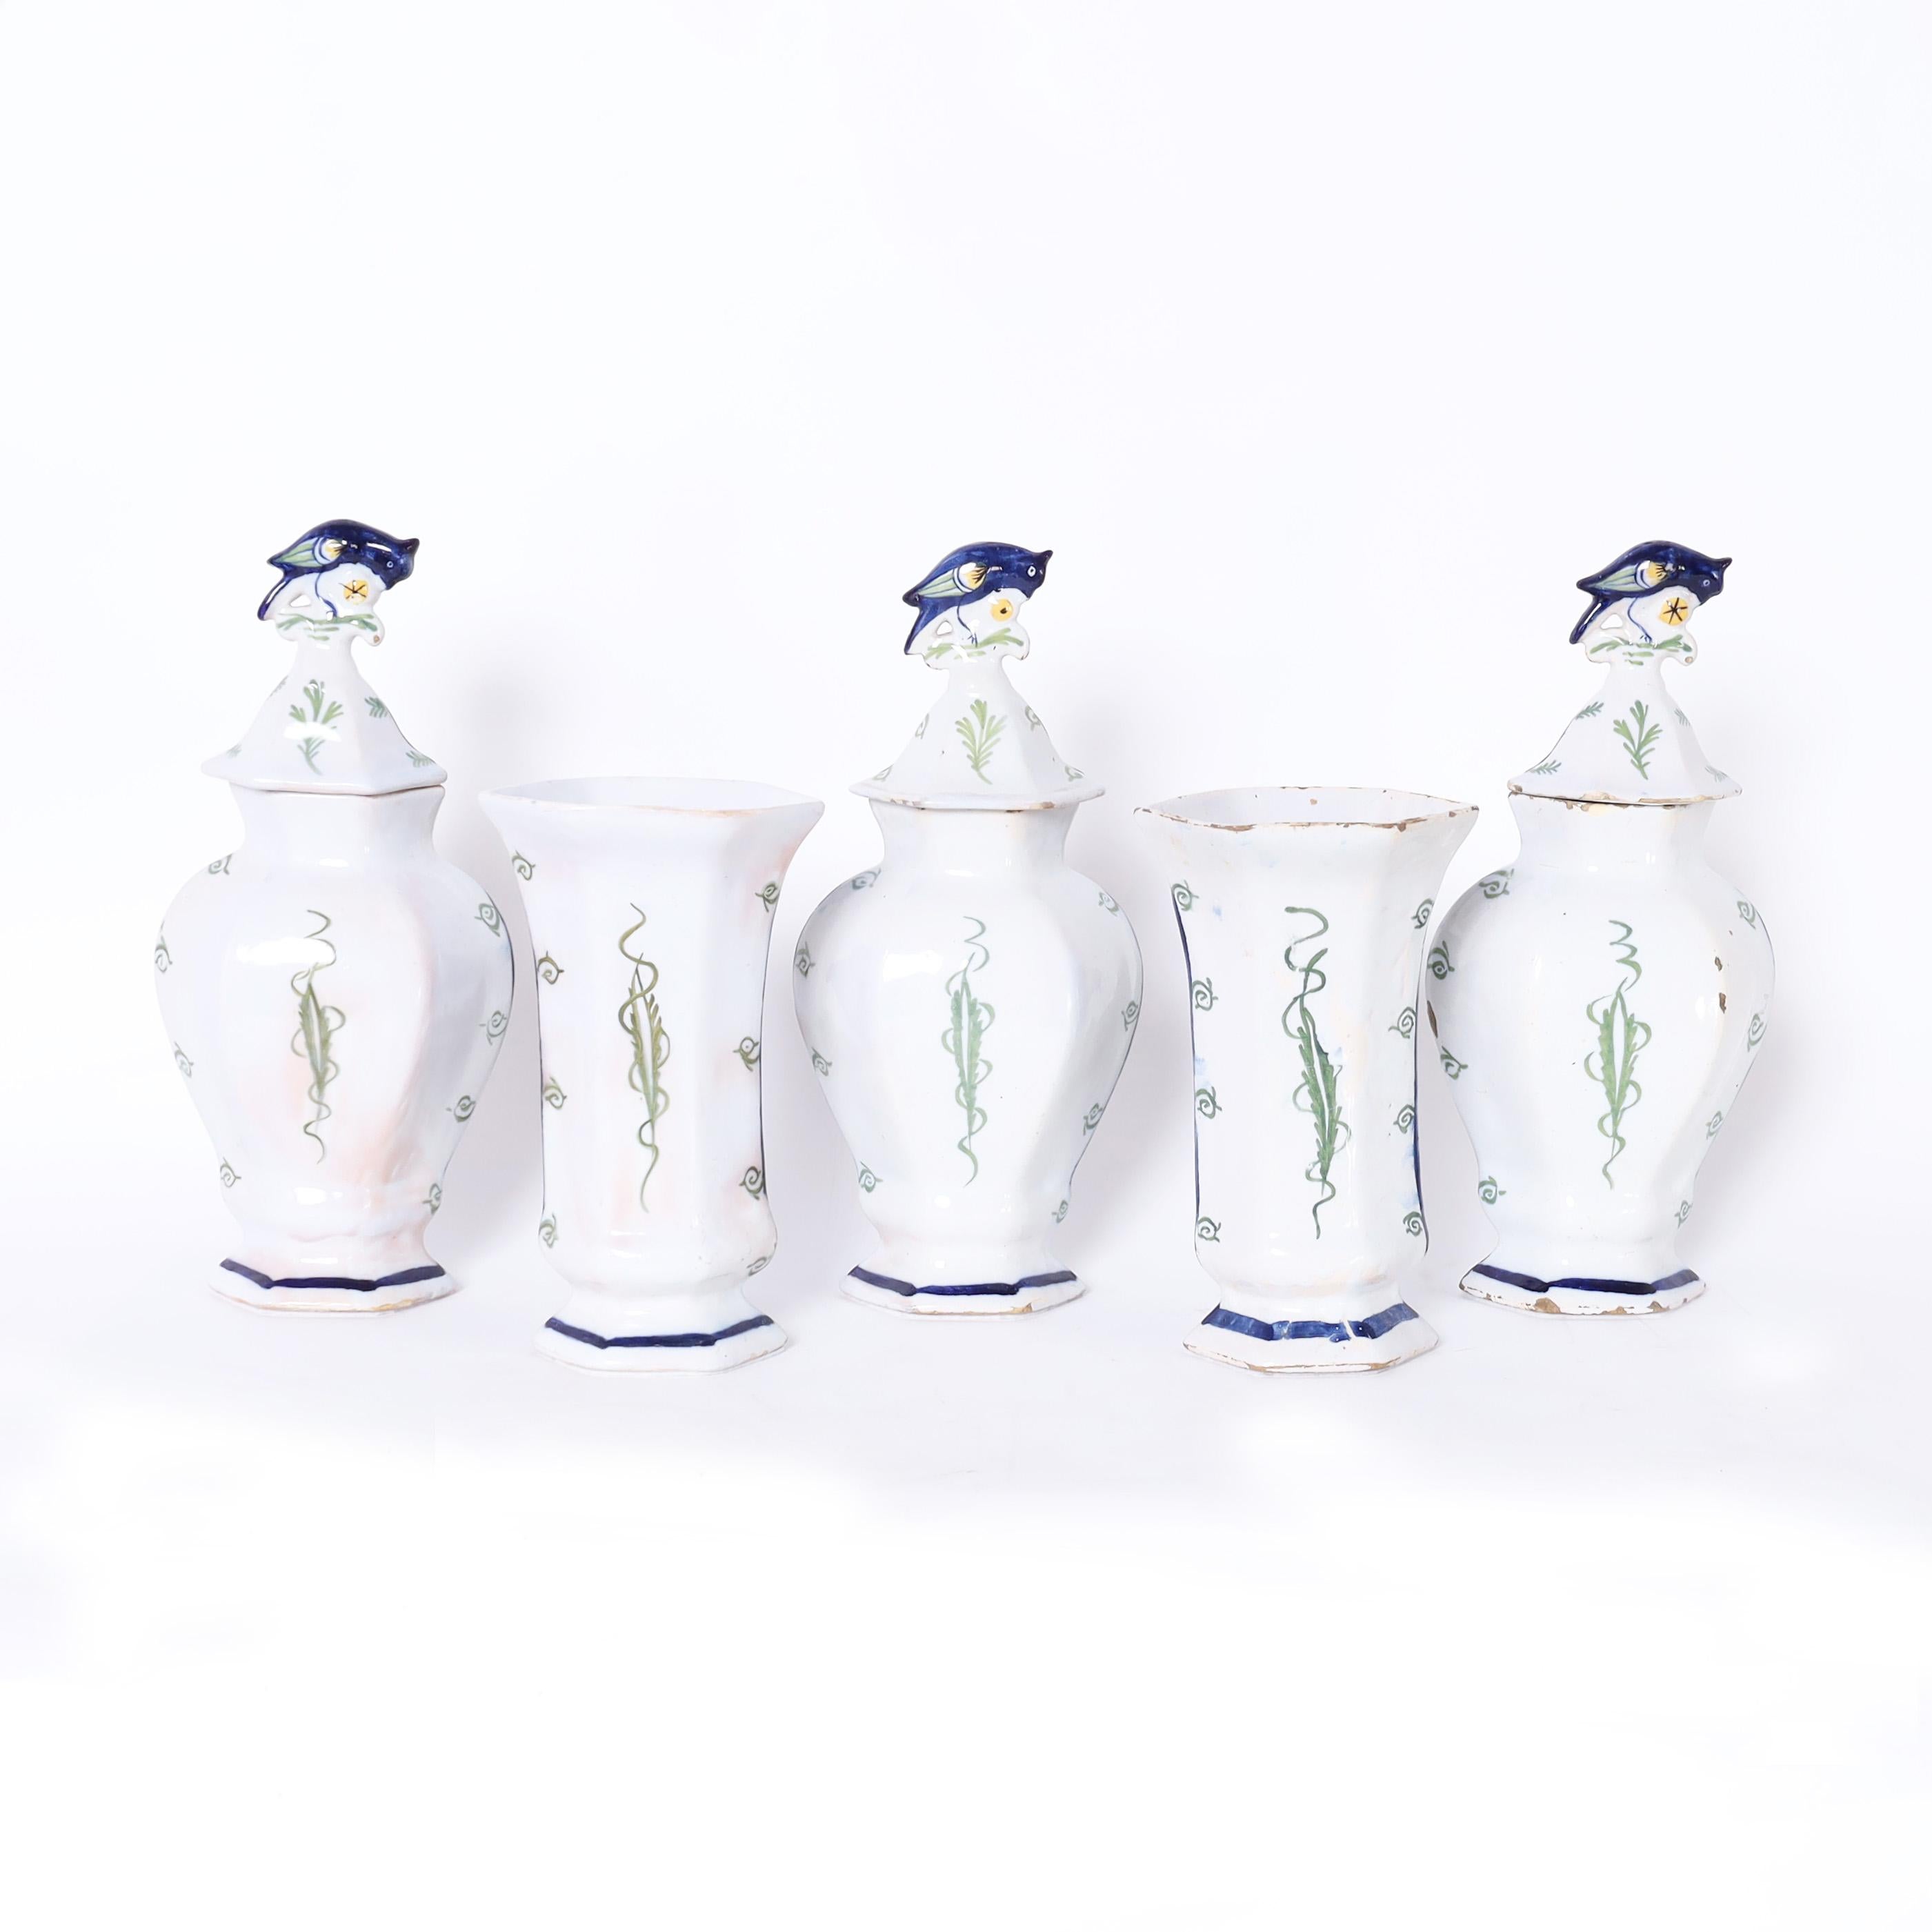 Rare and remarkable group of five English 18th century Delftware pieces, three lidded urns, and two vases crafted in terra cotta and polychrome decorated with floral motifs and glazed. Signed with the makers marks on the bottoms.

Urns- H: 13 W: 6